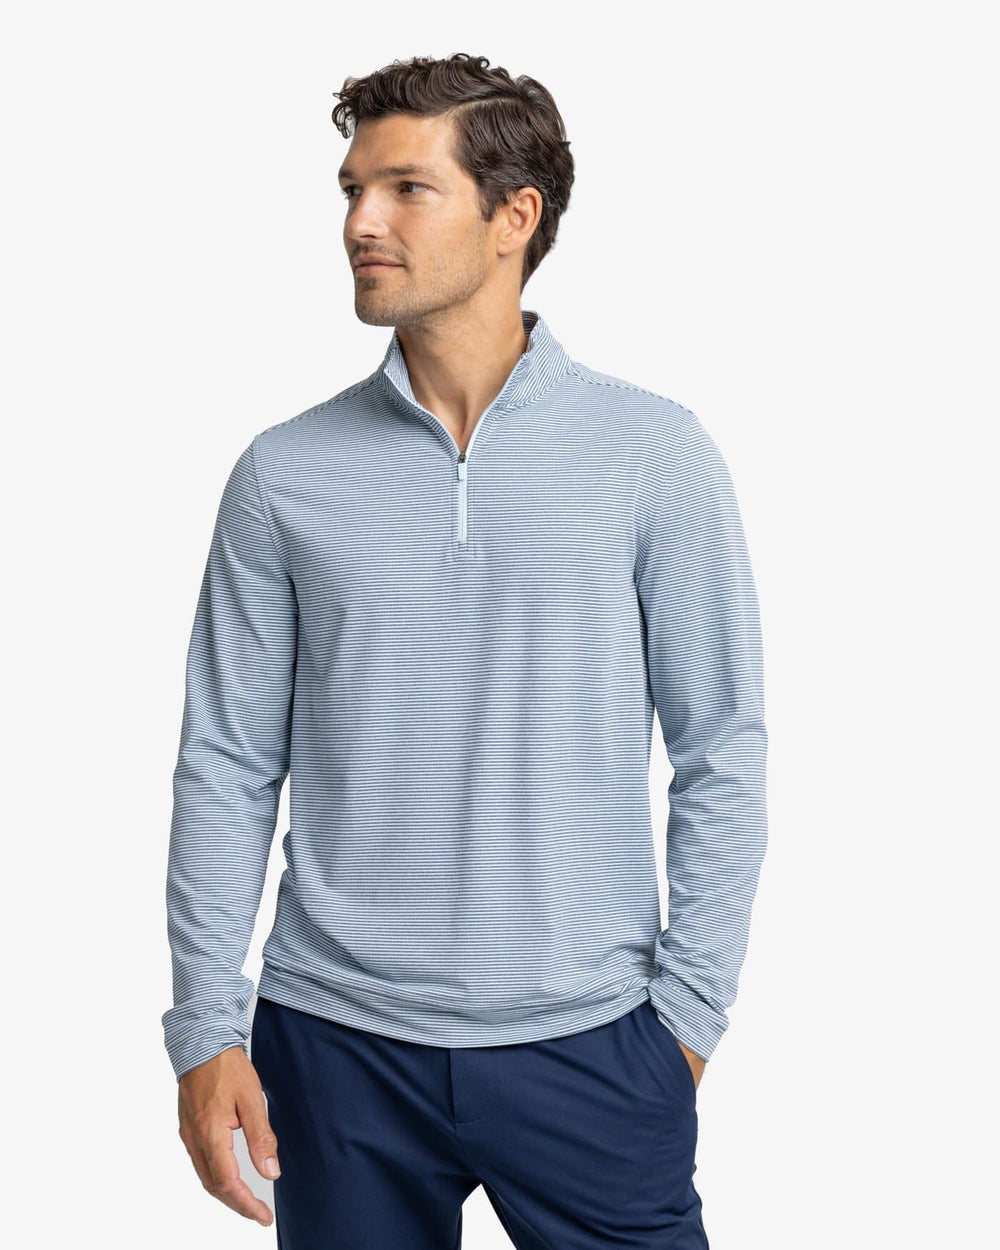 The front view of the Southern Tide Cruiser Heather Micro-Stripe Performance Quarter Zip Pullover by Southern Tide - Heather Dream Blue